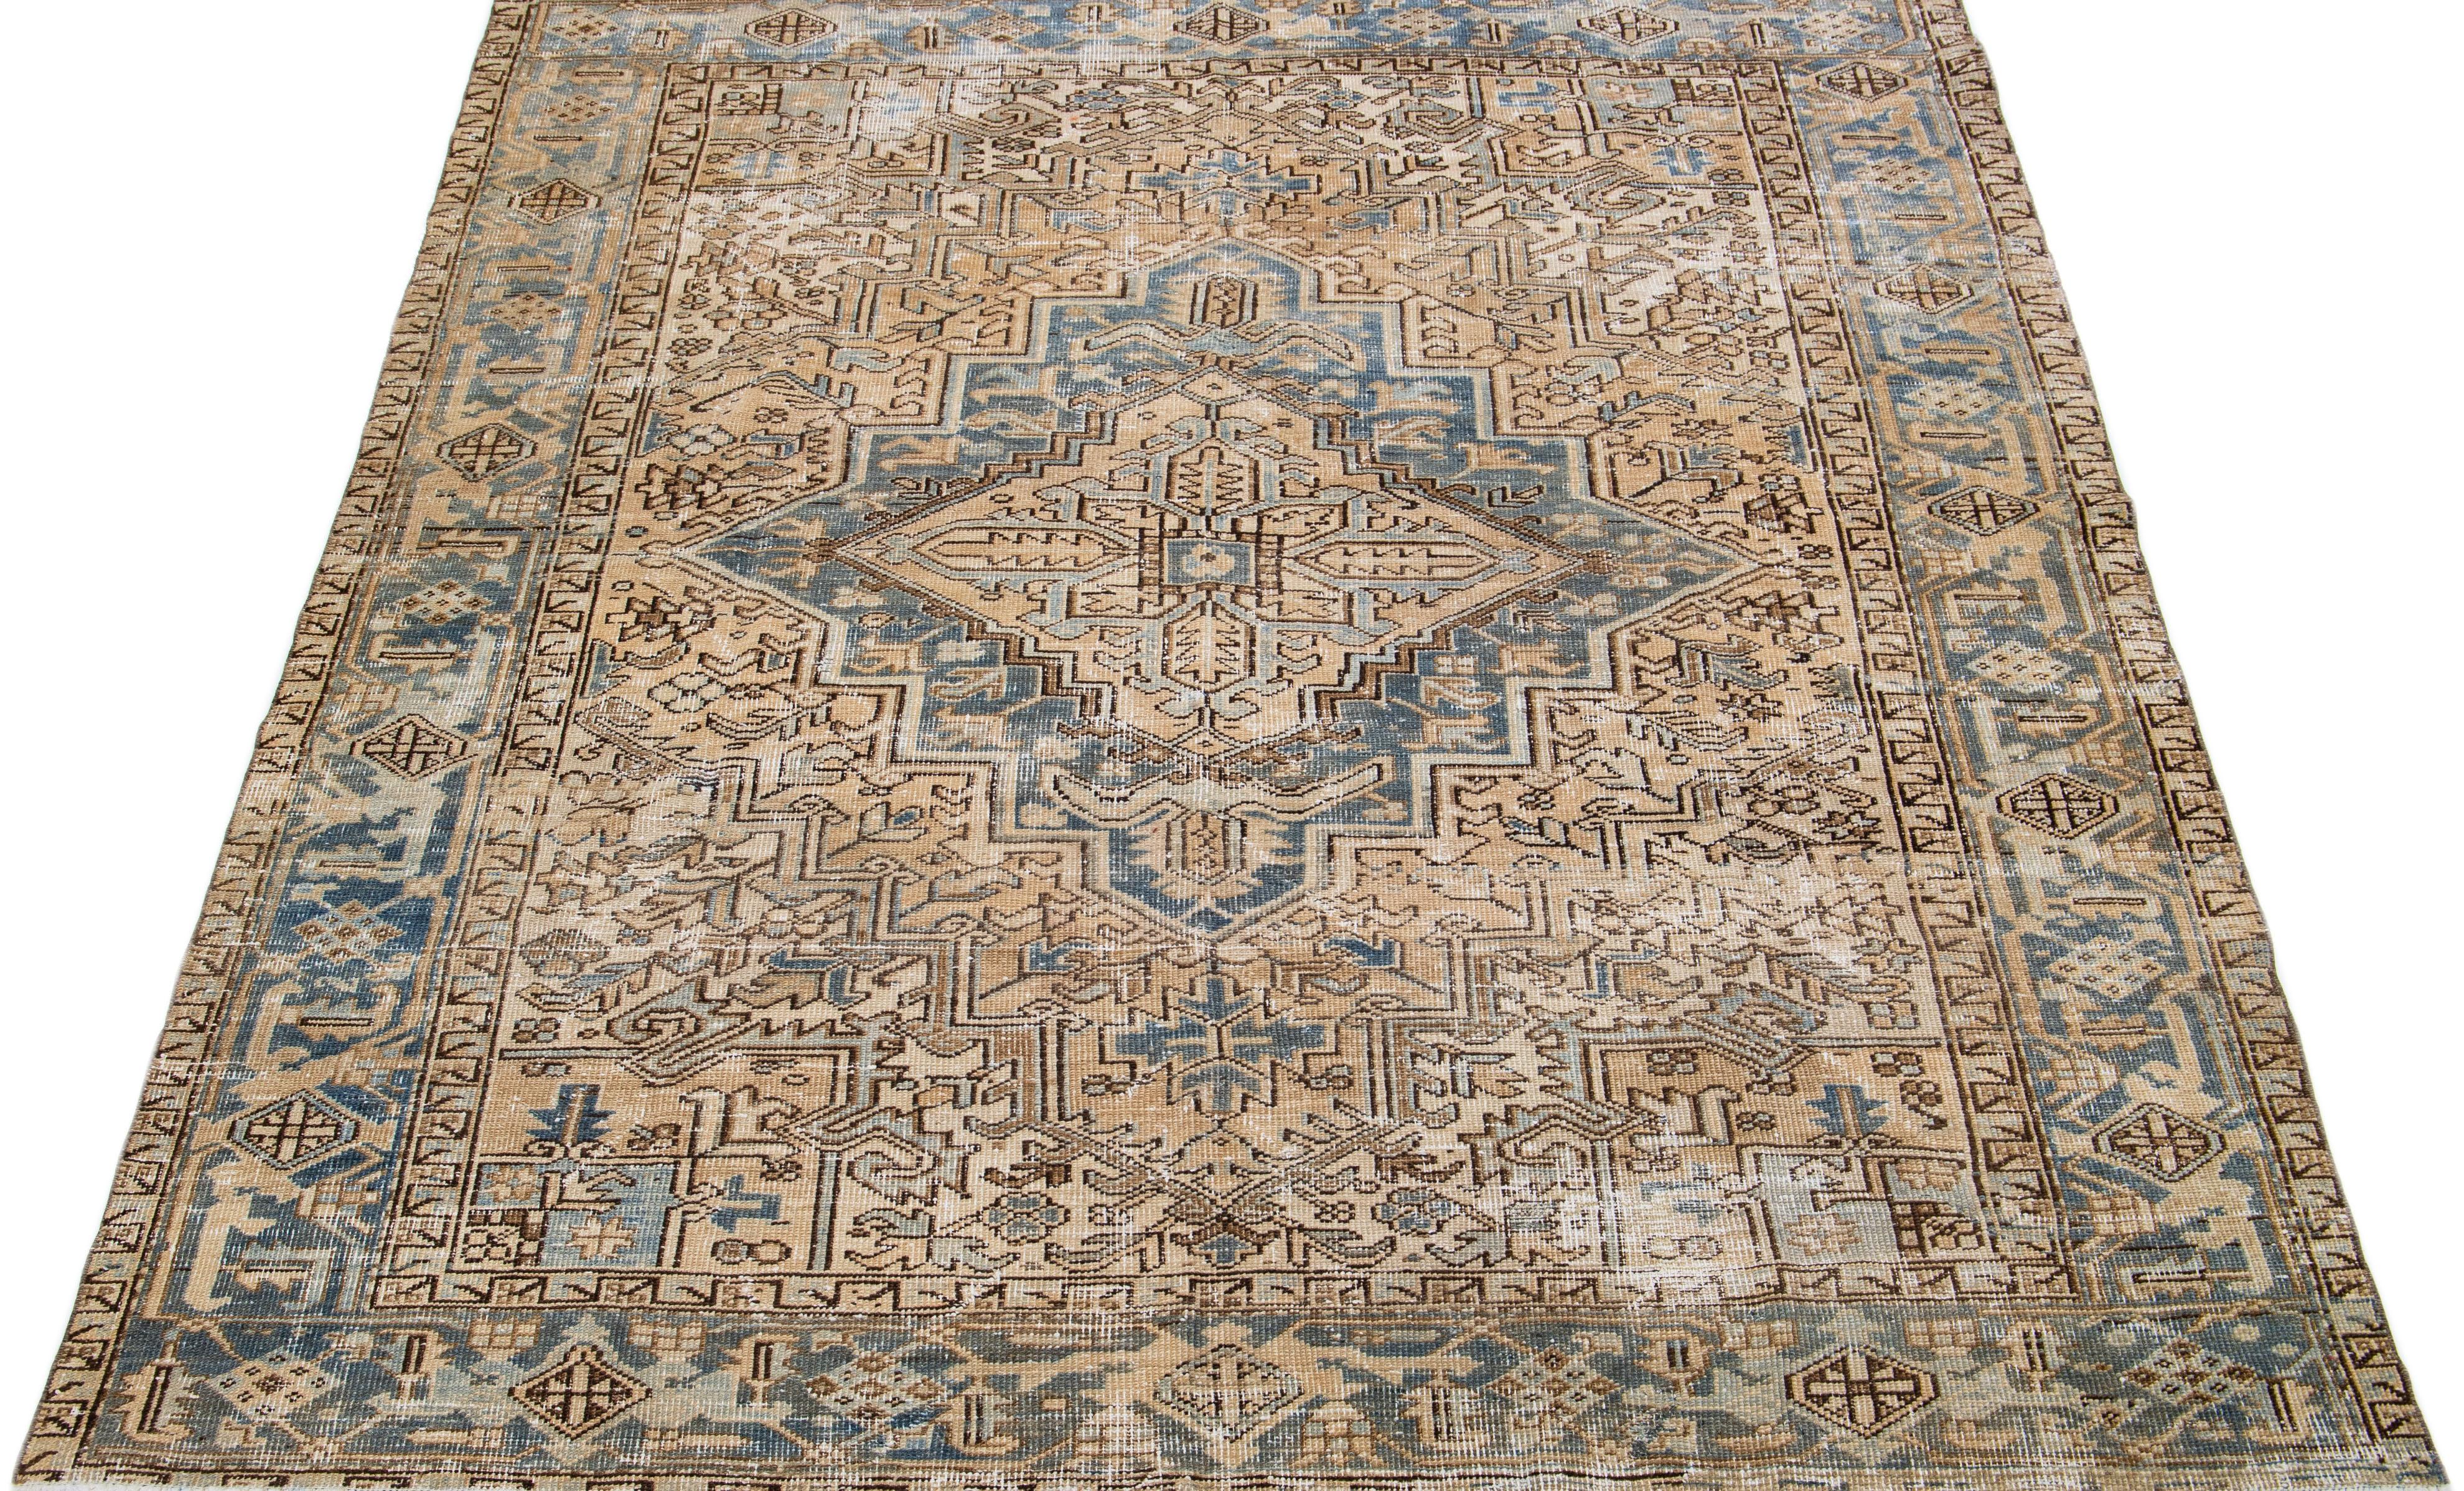 Beautiful antique Heriz hand-knotted wool rug with a beige field. This Persian rug has blue and brown accents in a gorgeous all-over layout medallion floral design.

This rug measures: 7' x 8'5